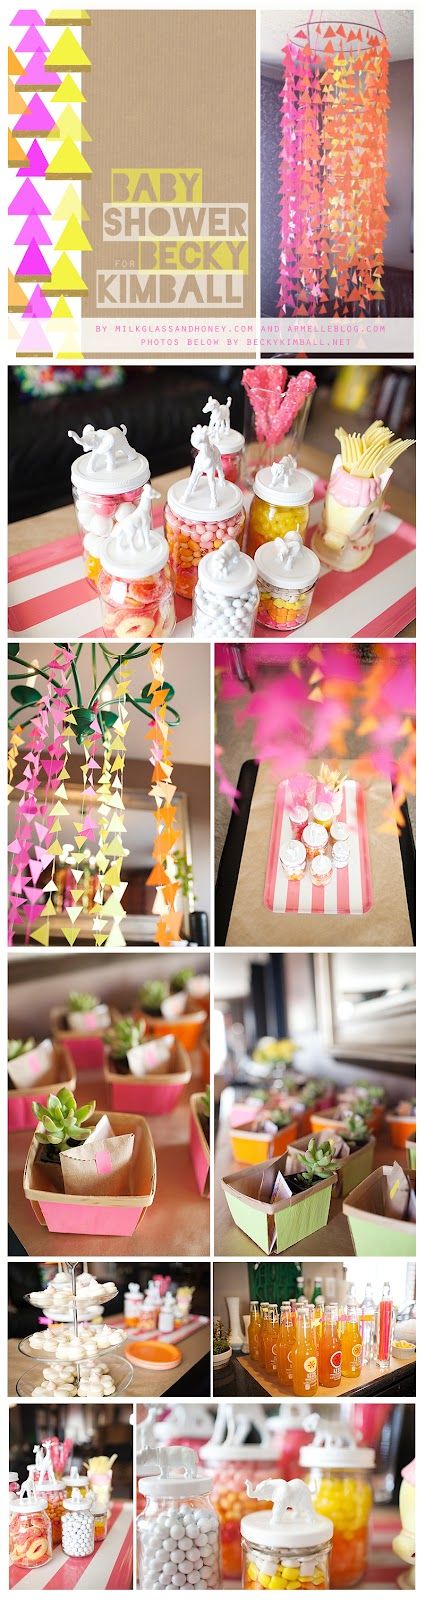 Neon Baby Shower…would any of these ideas work for the wedding?